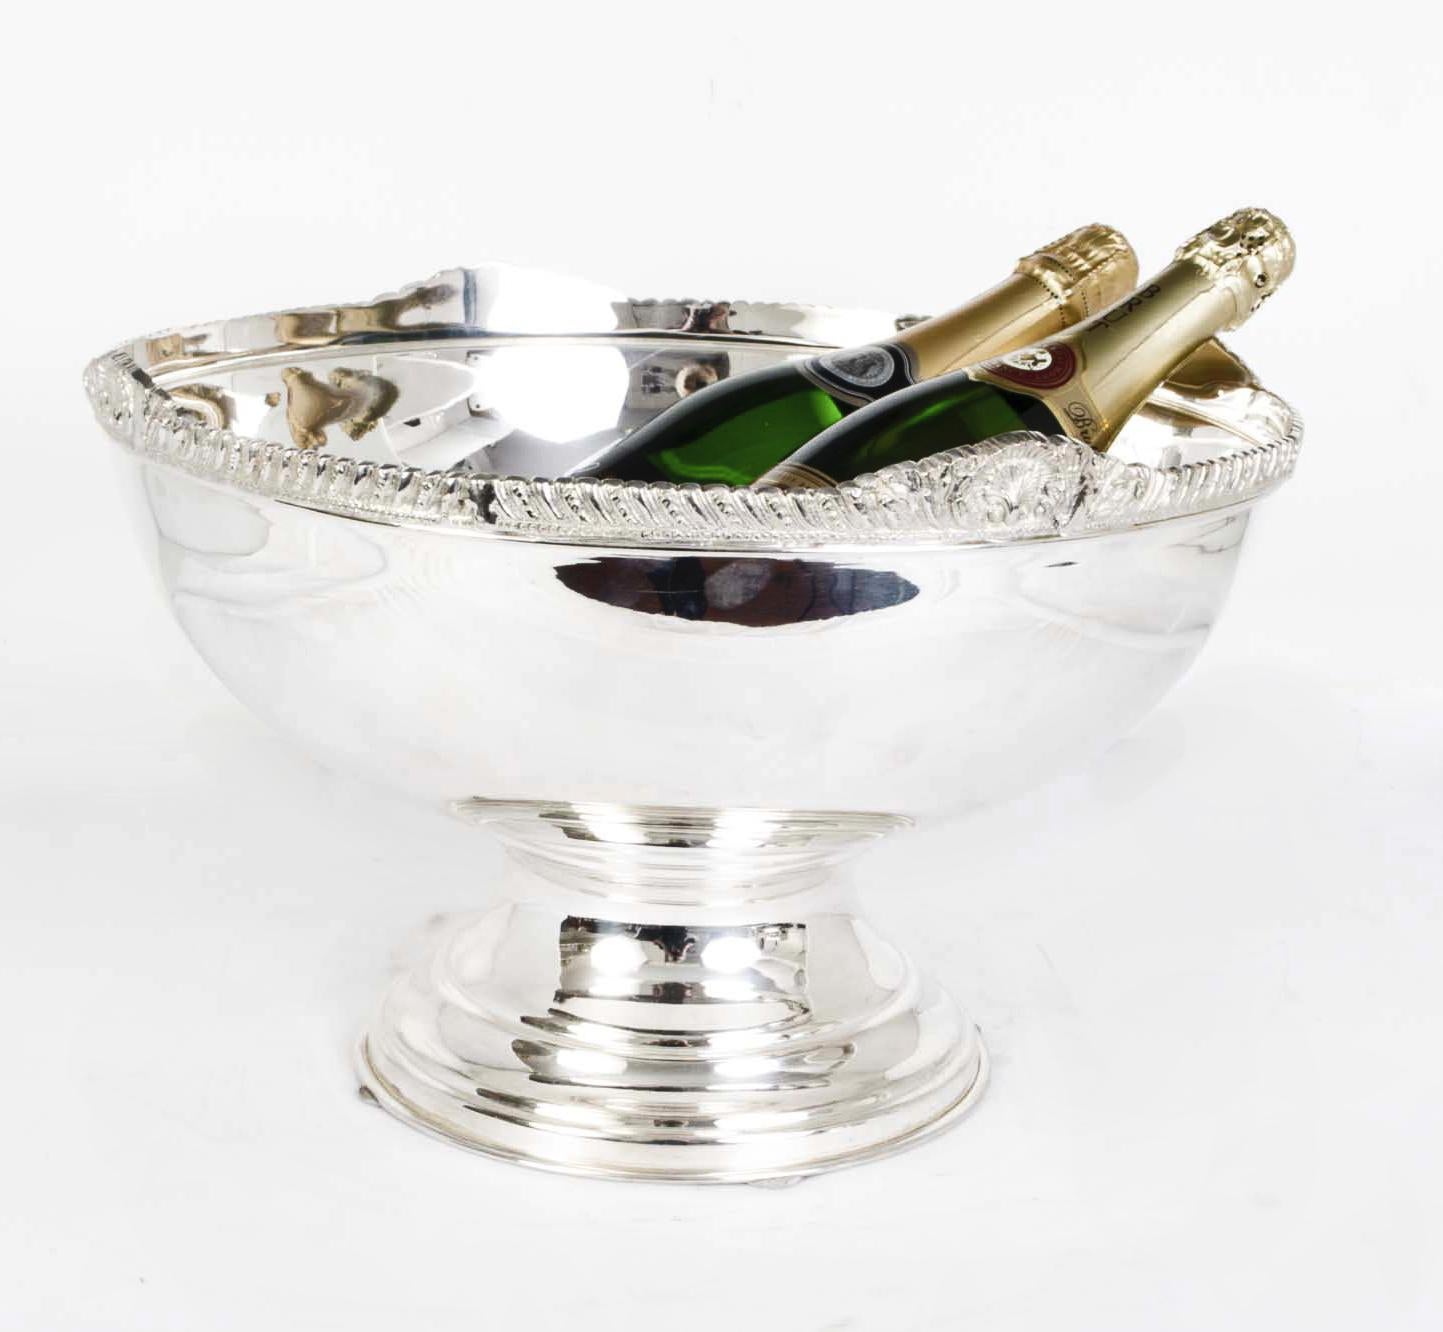 Vintage Large Silver Plated Punch Bowl Champagne Cooler 20th C 6